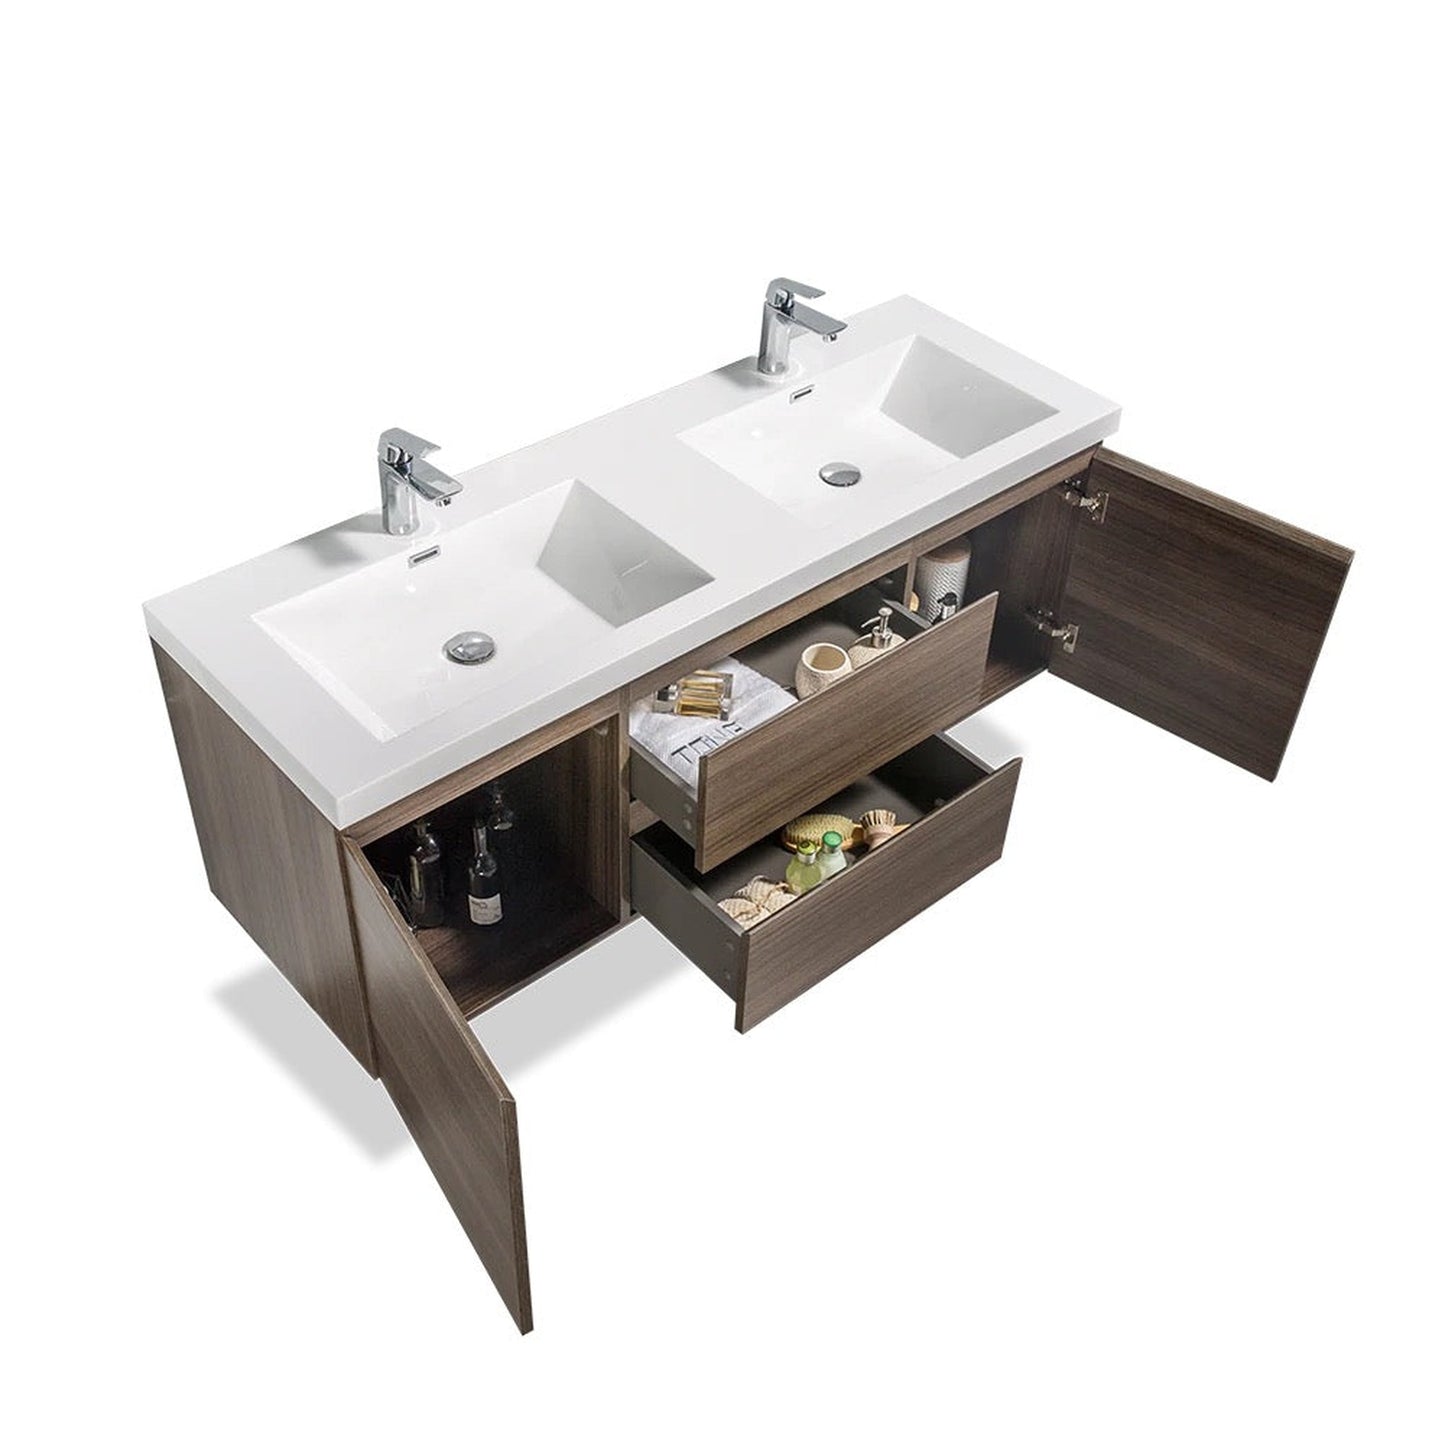 TONA Angela 48" White & Gray Oak Wall-Mounted Bathroom Vanity With Faux Marble Integrated Top & Double Sink